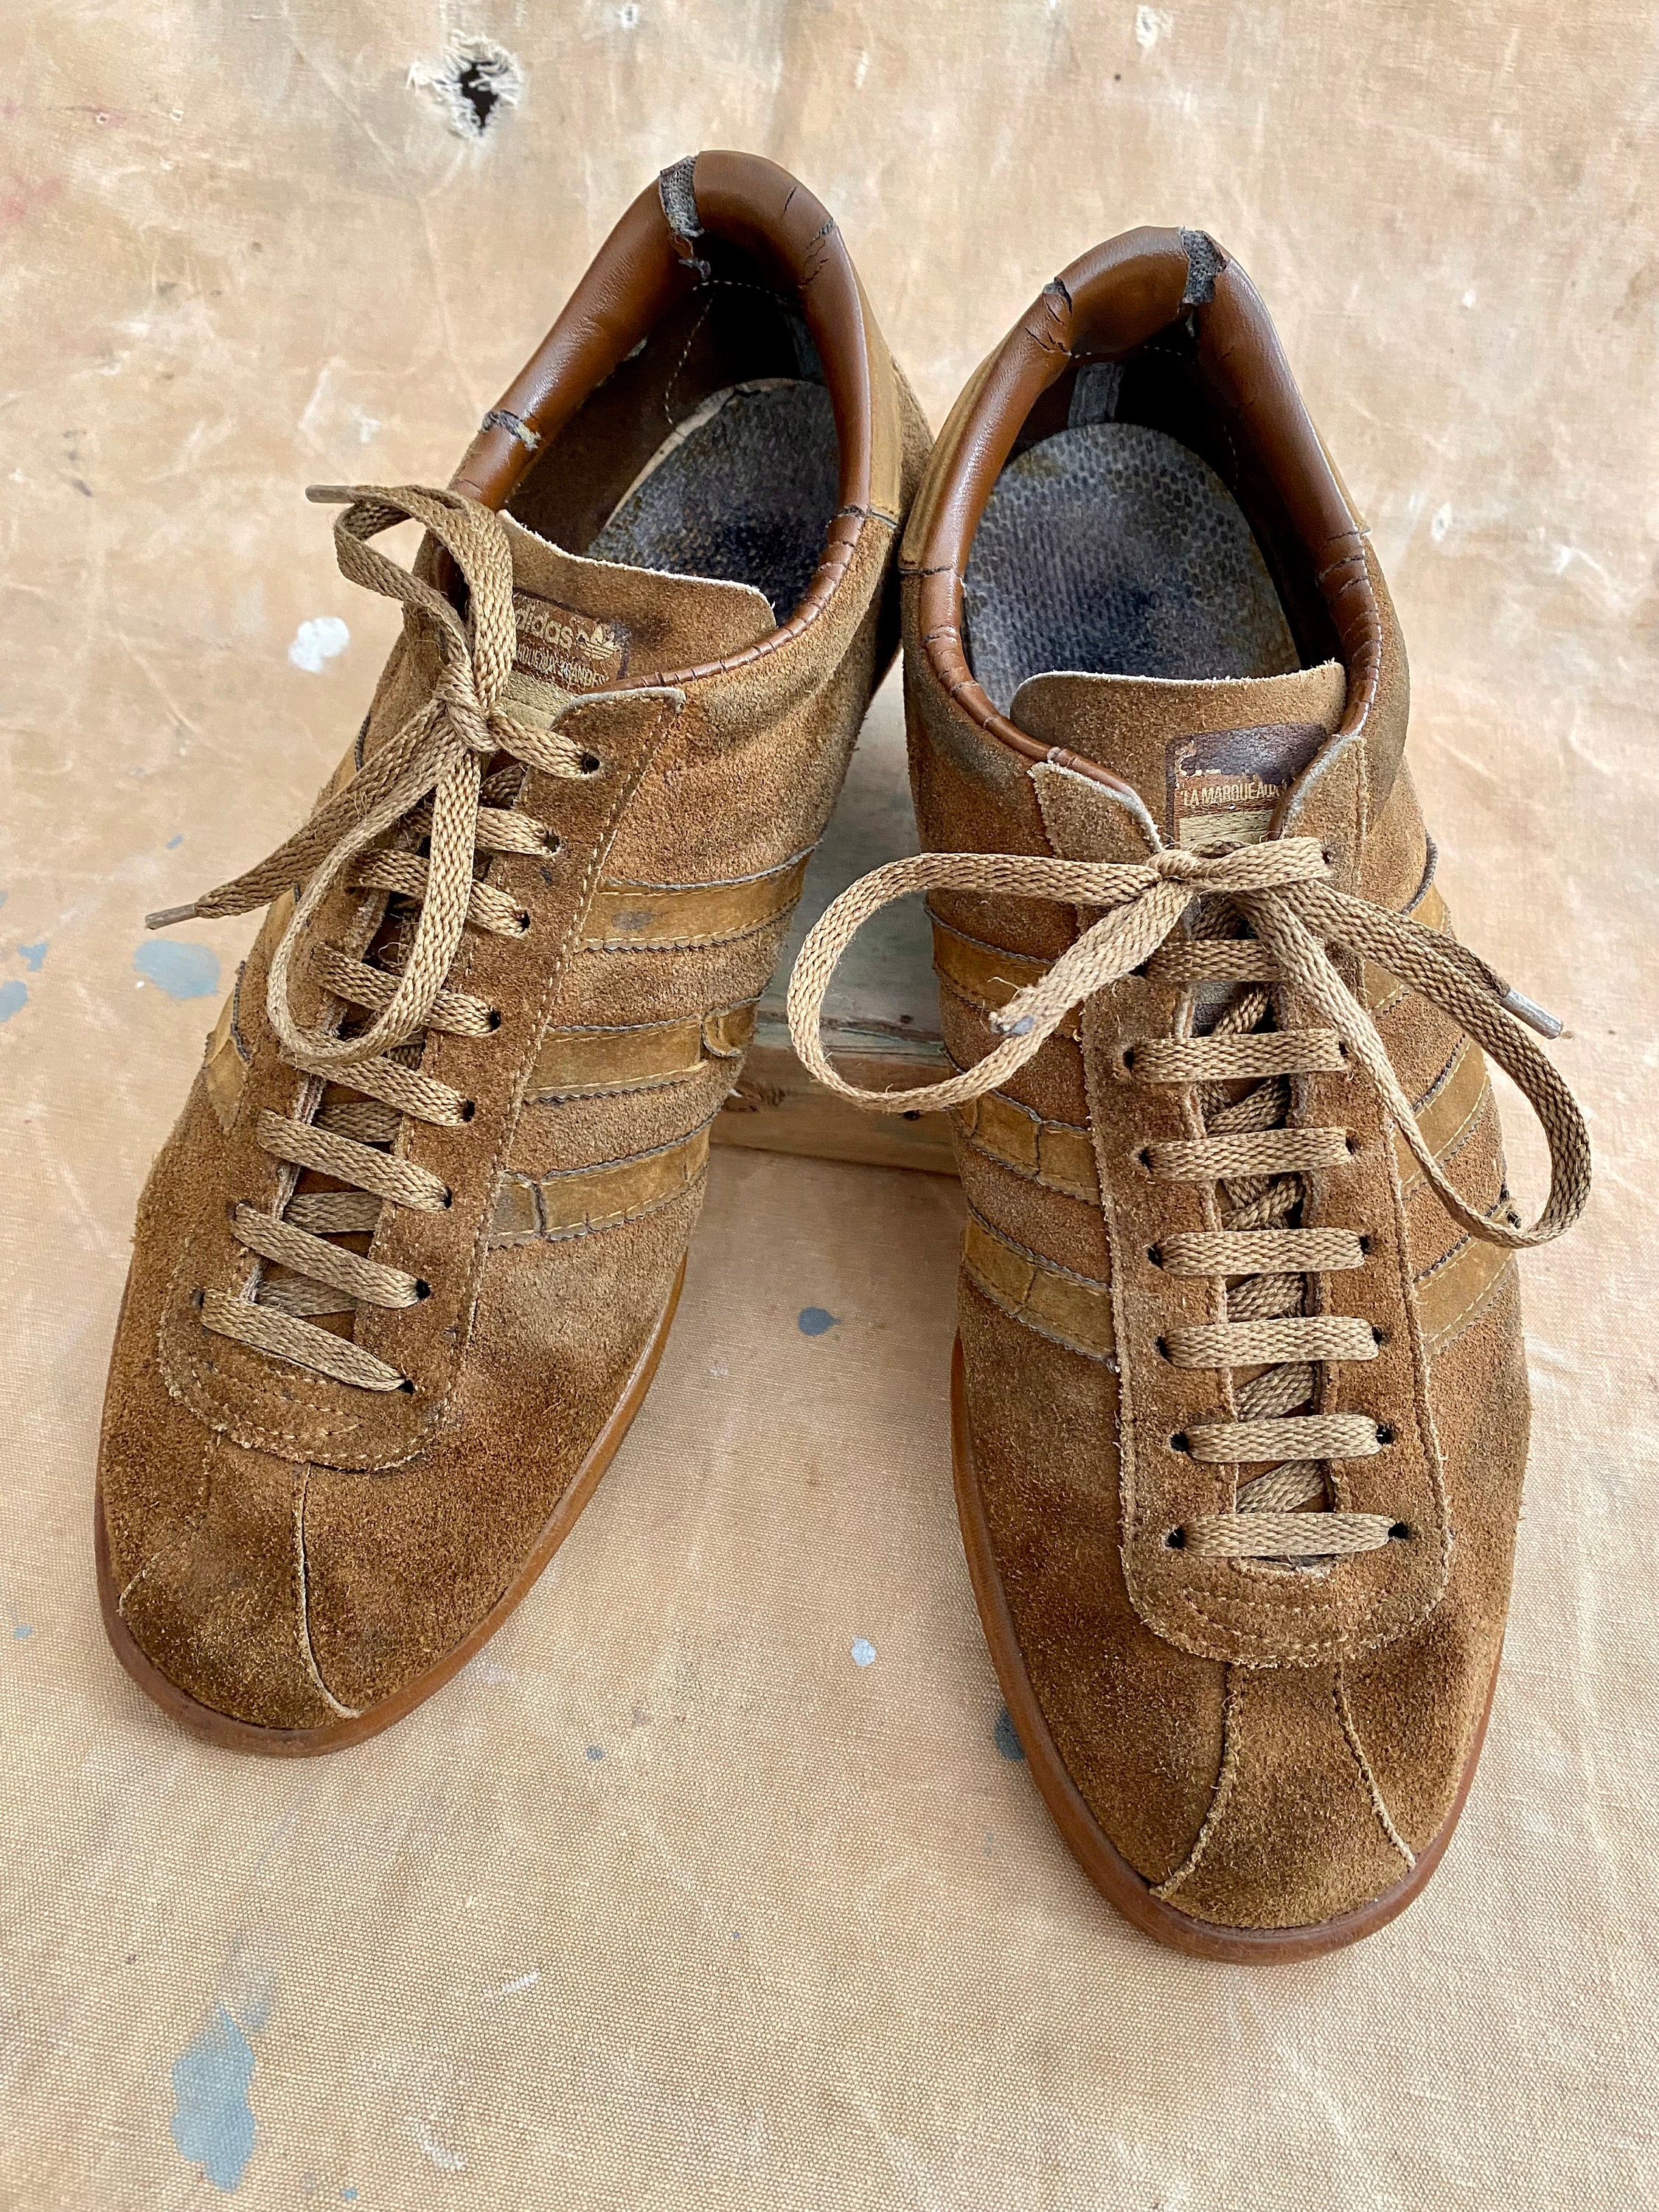 Rare Vintage 1970s Adidas Running Shoes AC 1618 ROM Canada